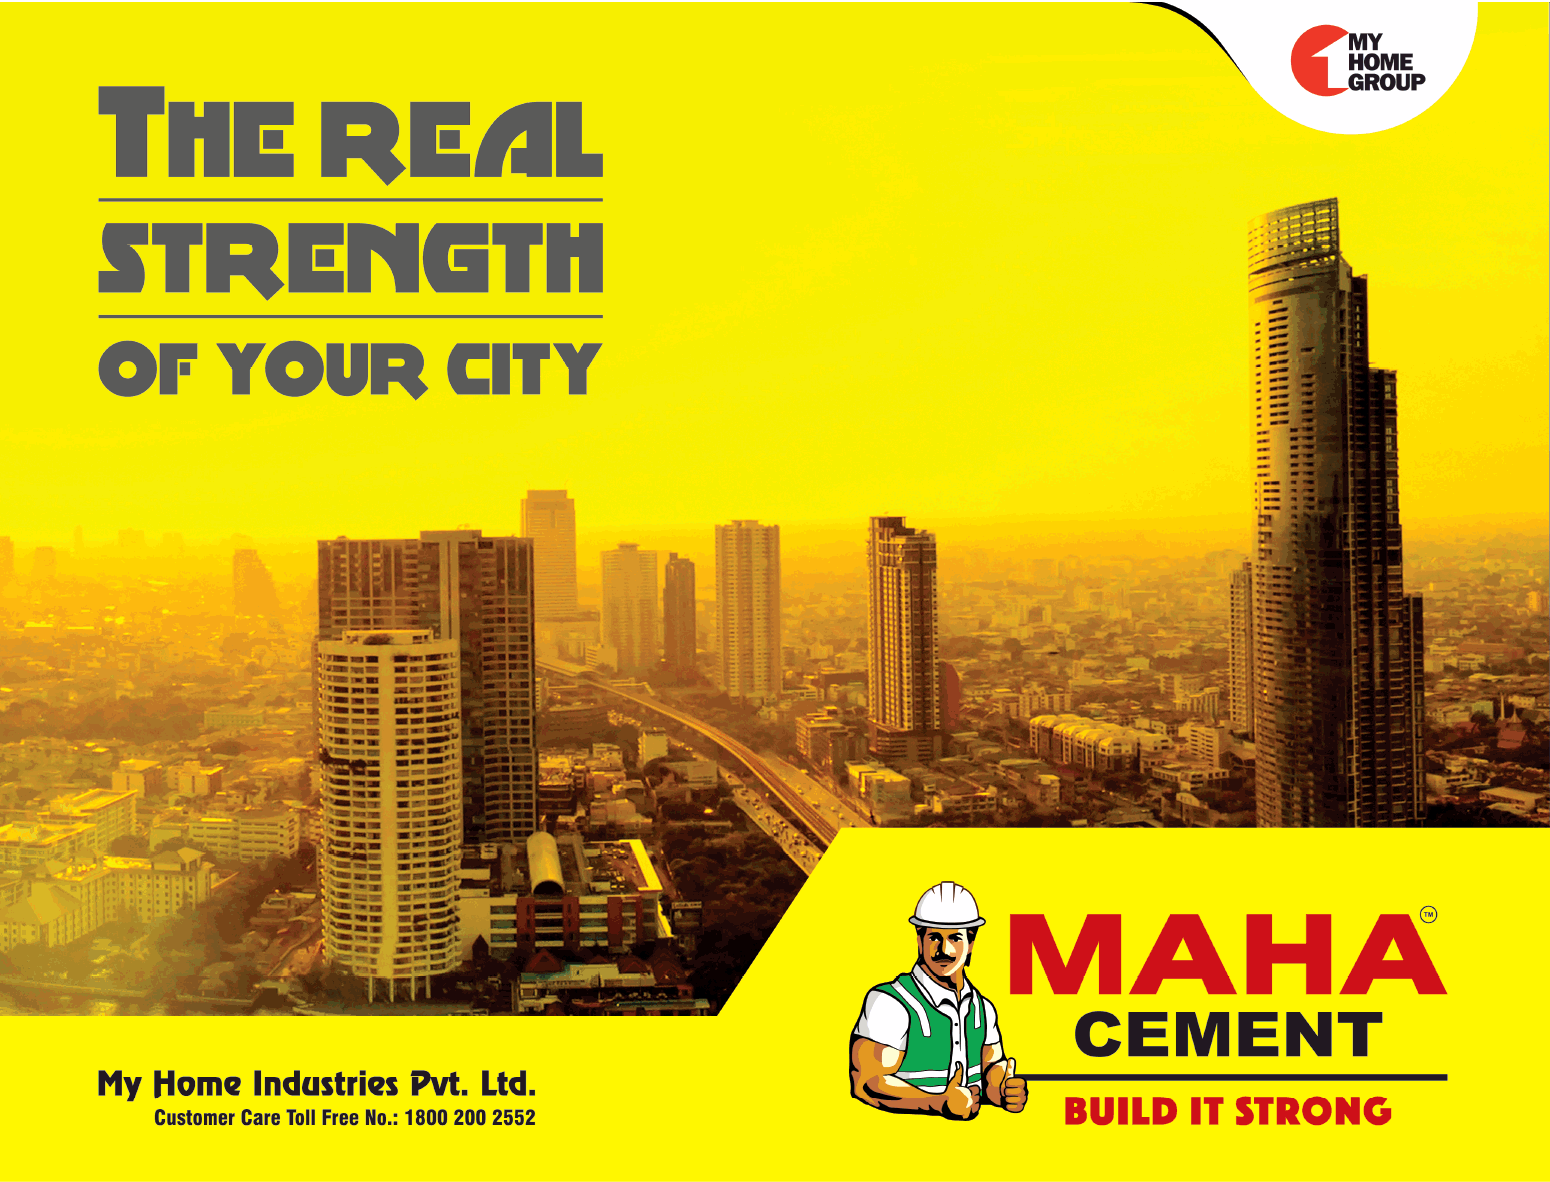 maha-cement-built-it-strong-the-real-strength-of-your-city-ad-times-of-india-bangalore-14-06-2019.png